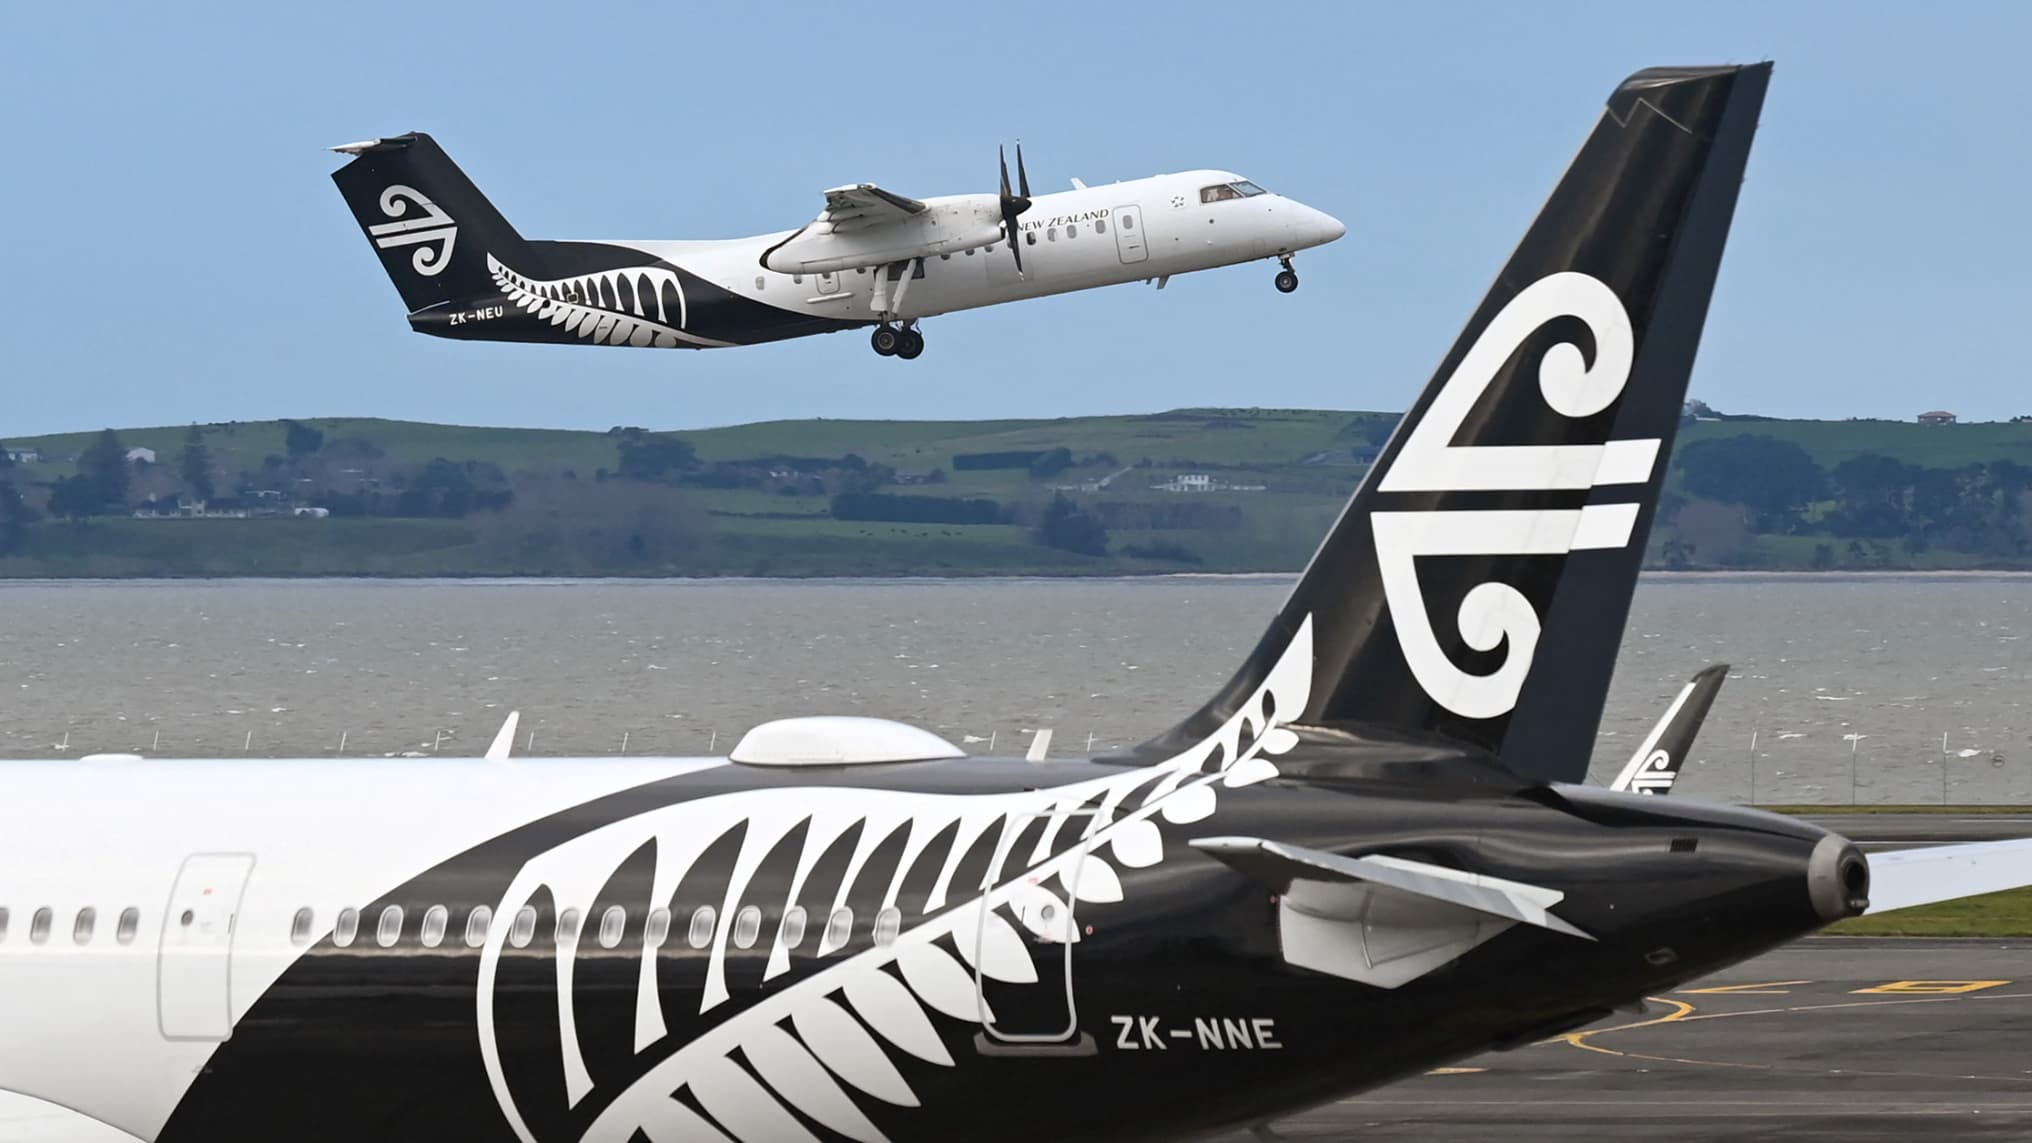 Air New Zealand passengers must be weighed prior to boarding